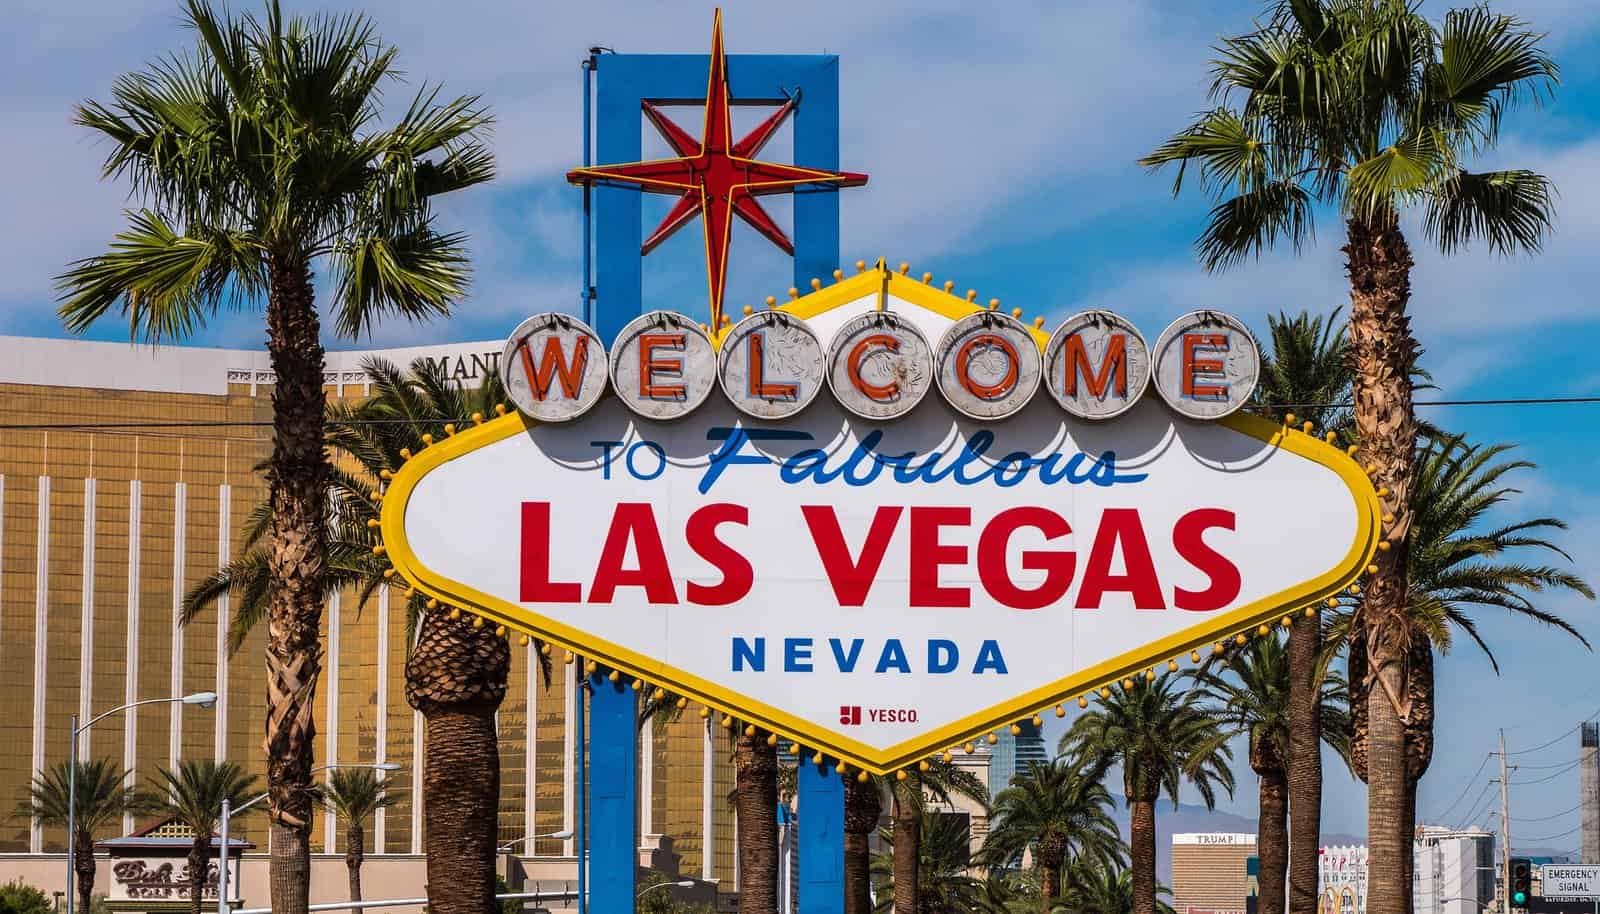 Business Class from Dublin to Las Vegas for €1,634 Round Trip on Air Canada